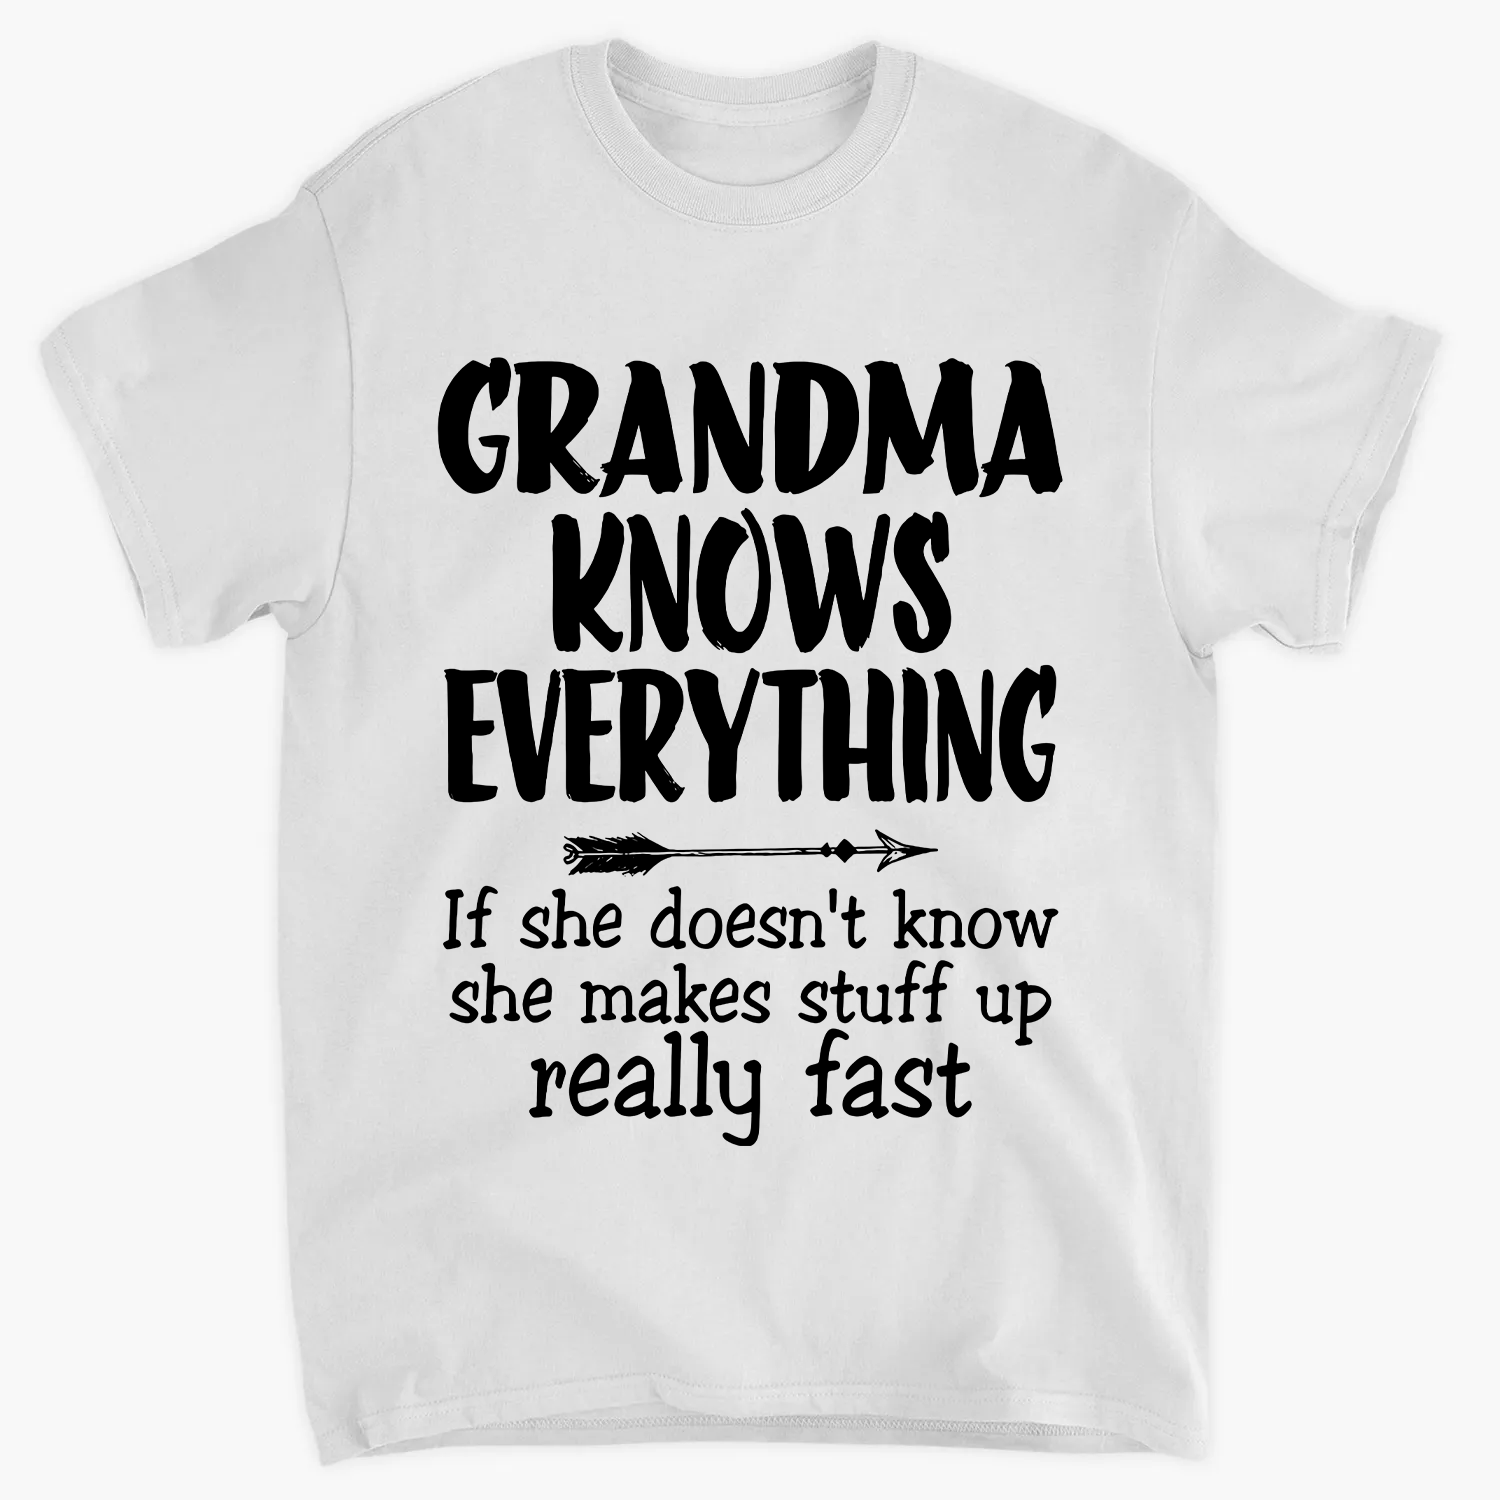 Grandma Knows Everything If She Doesn't Know She Makes Stuff Up Really Fast - T-shirt - Mother's Day Gift For Grandma